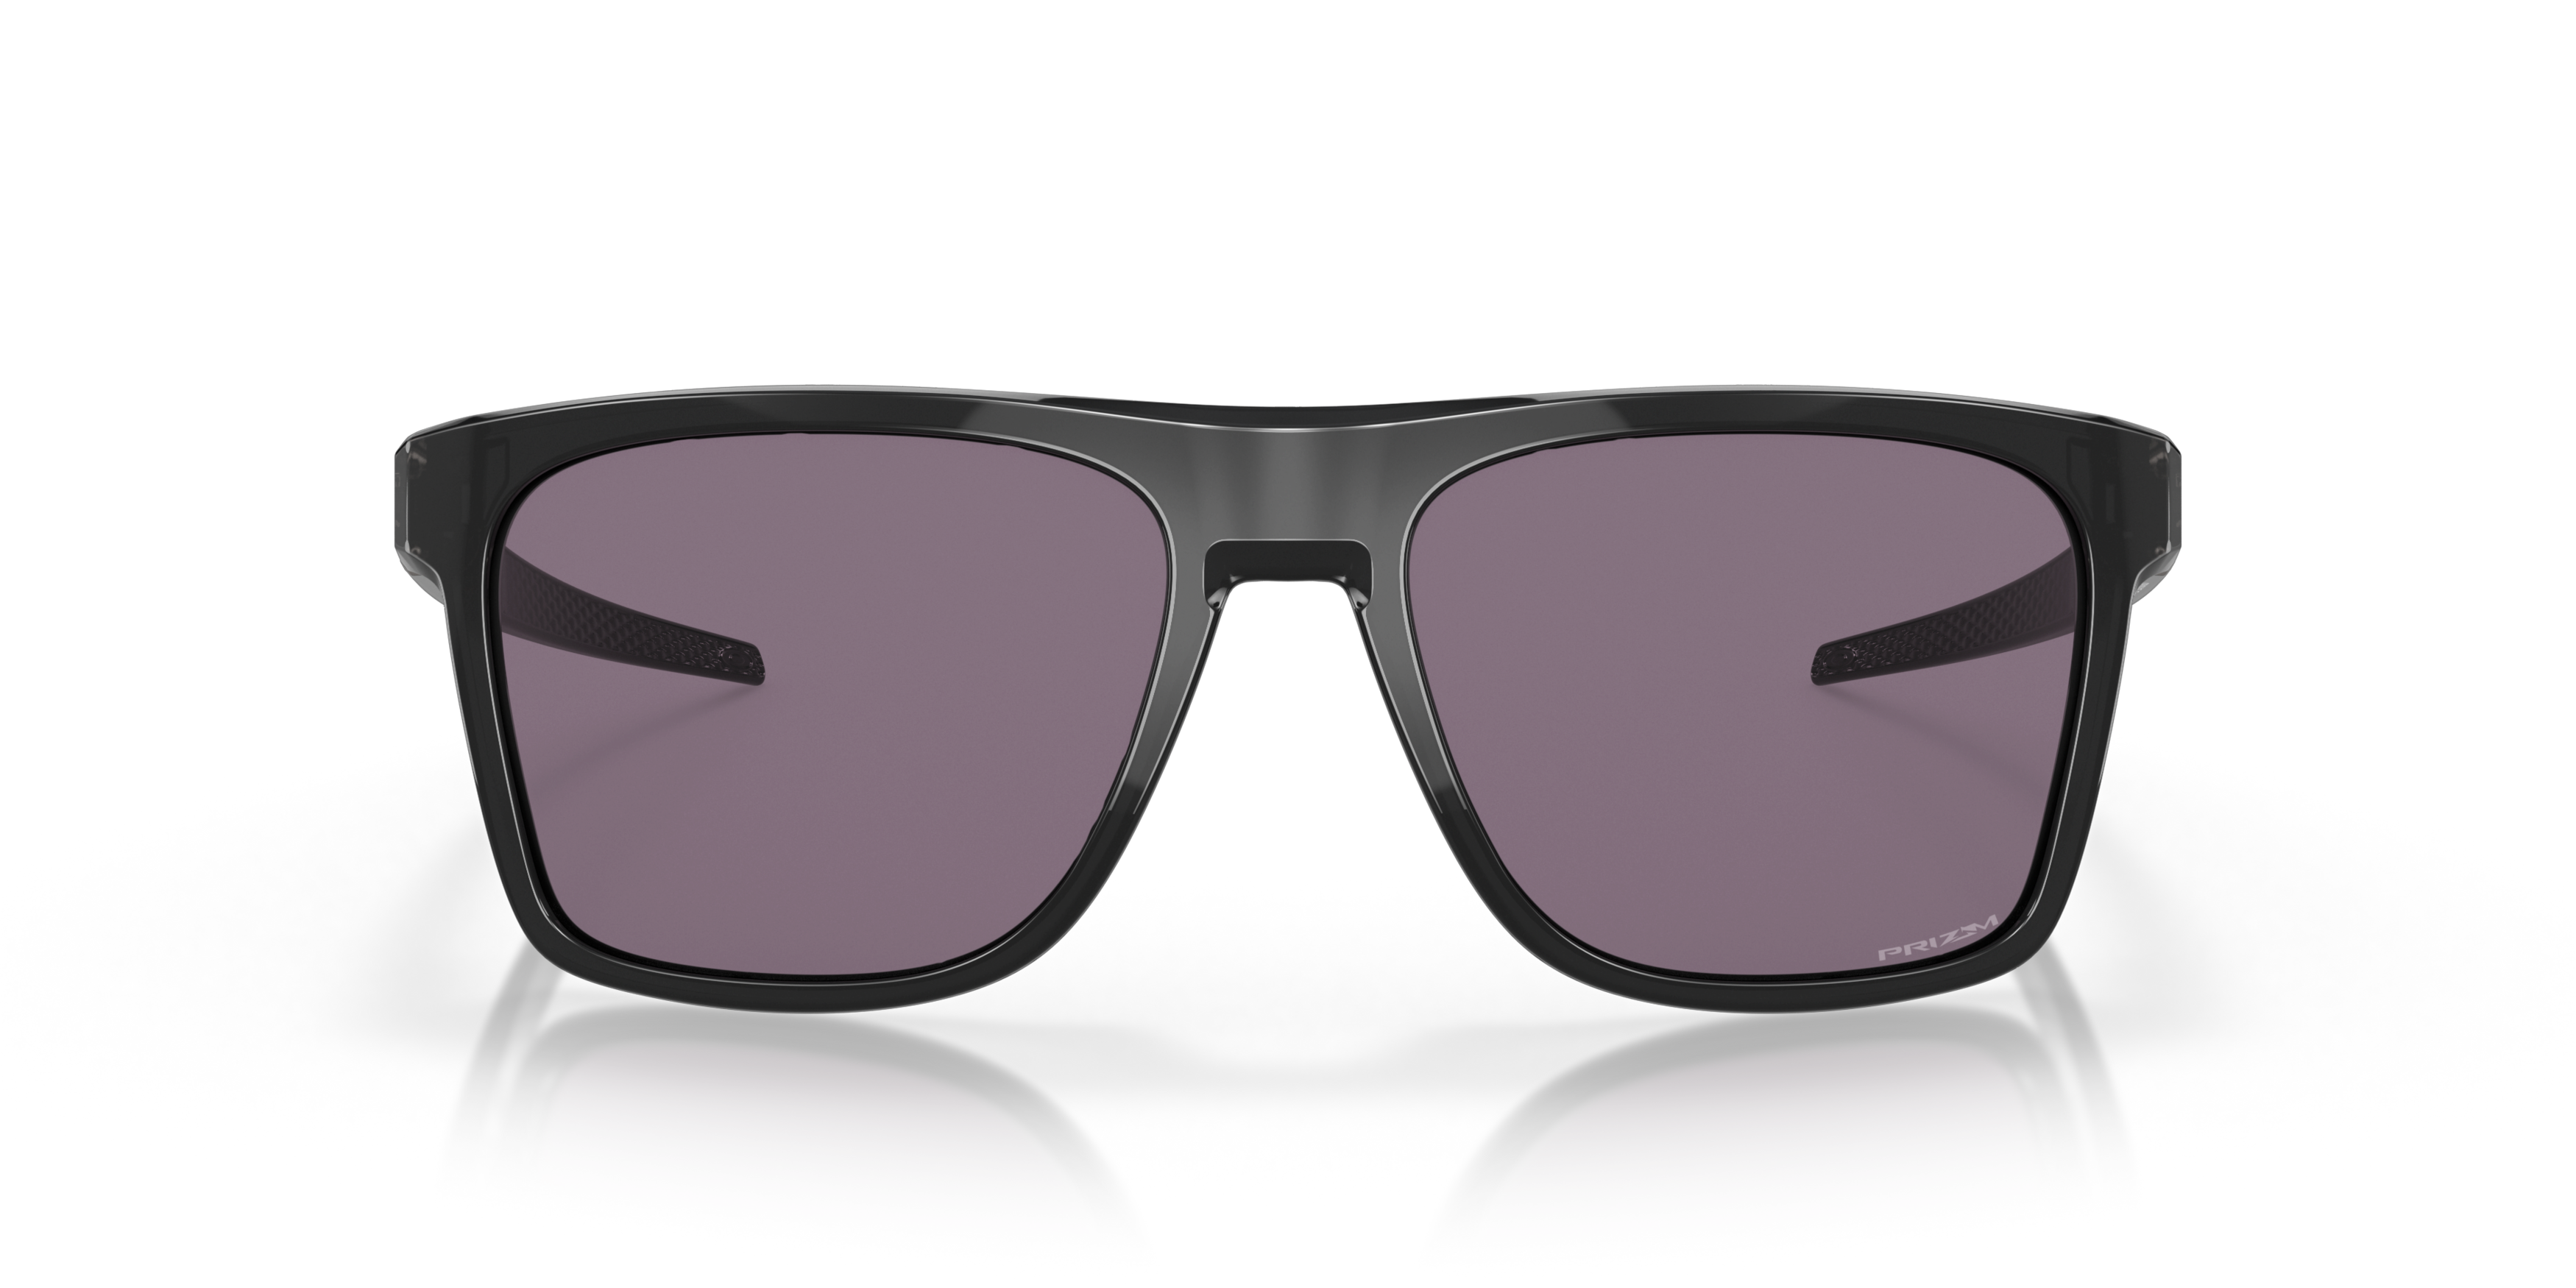 [products.image.front] OAKLEY OO9100 910001